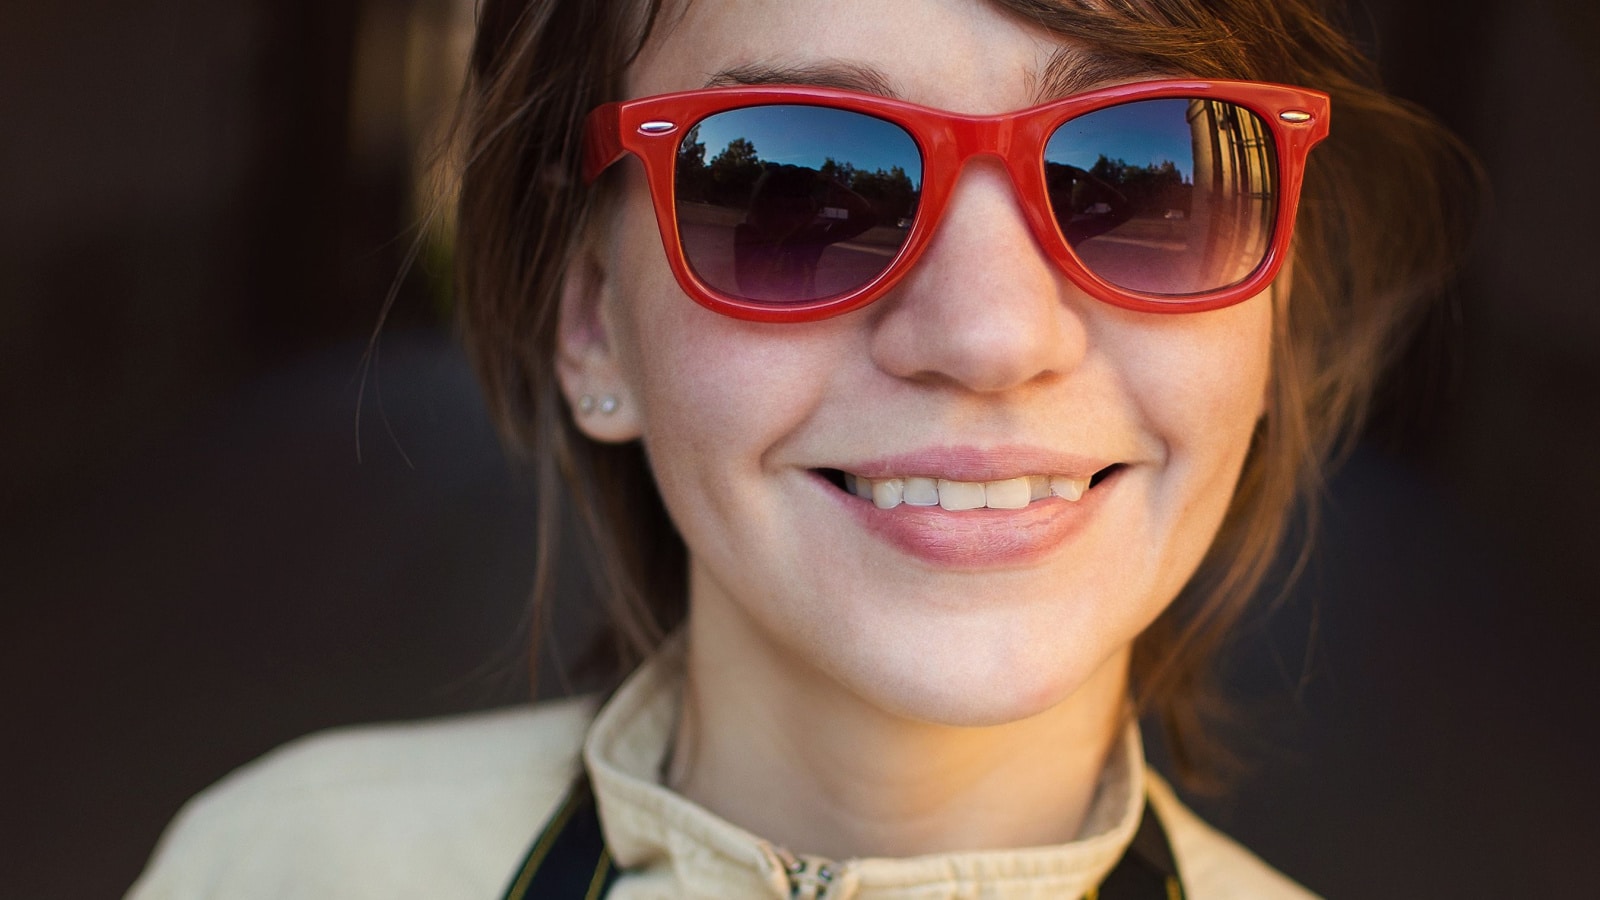 The girl in red sunglasses smiling